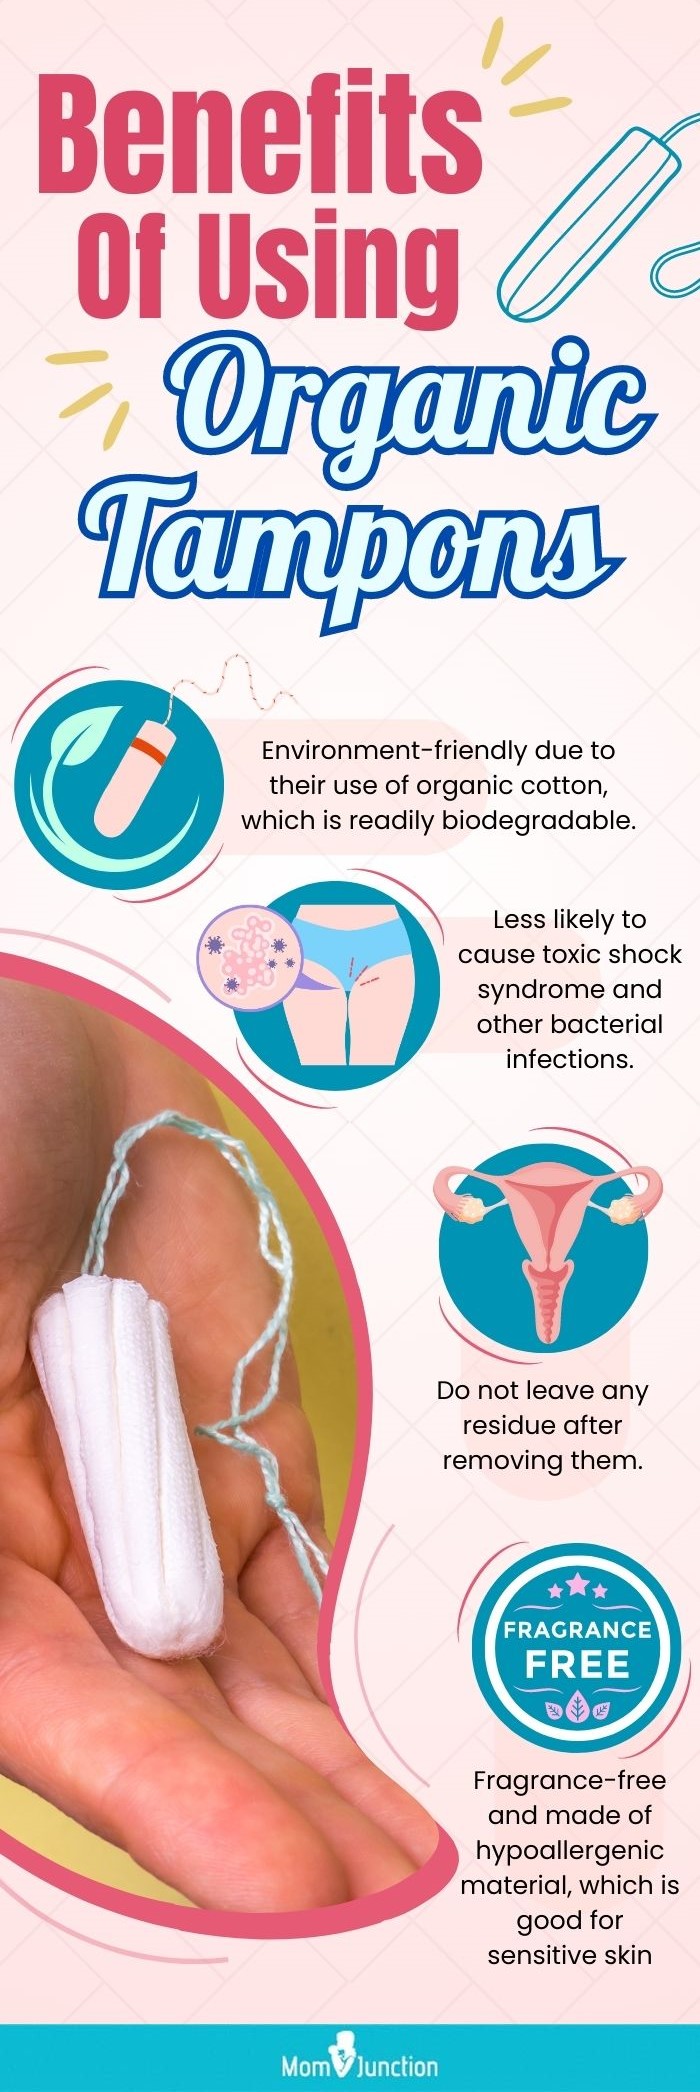 Why Should Women Use Organic Tampons(infographic)